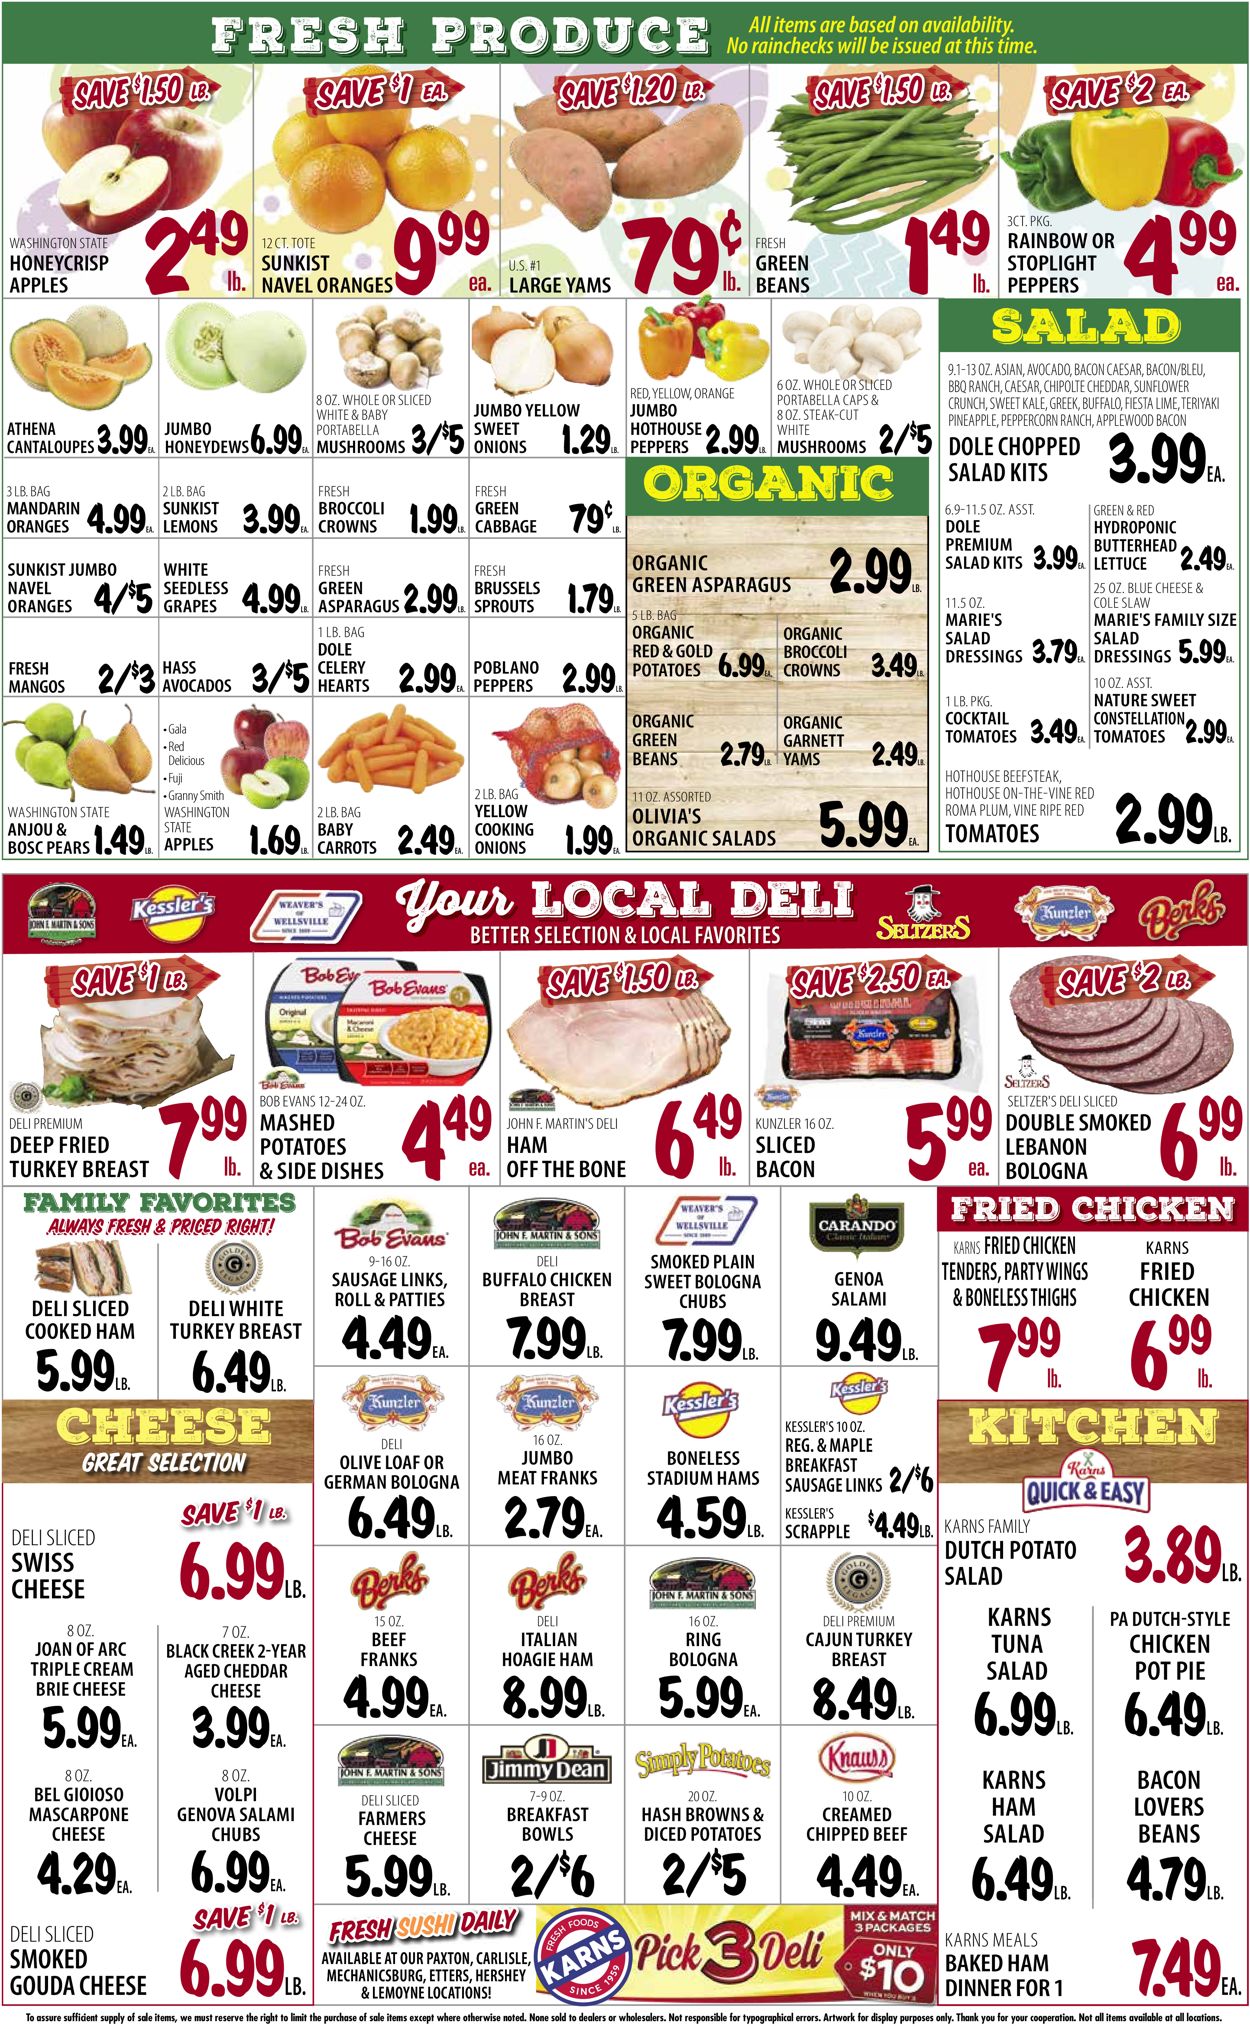 Catalogue Karns Quality Foods EASTER AD 2022 from 04/12/2022